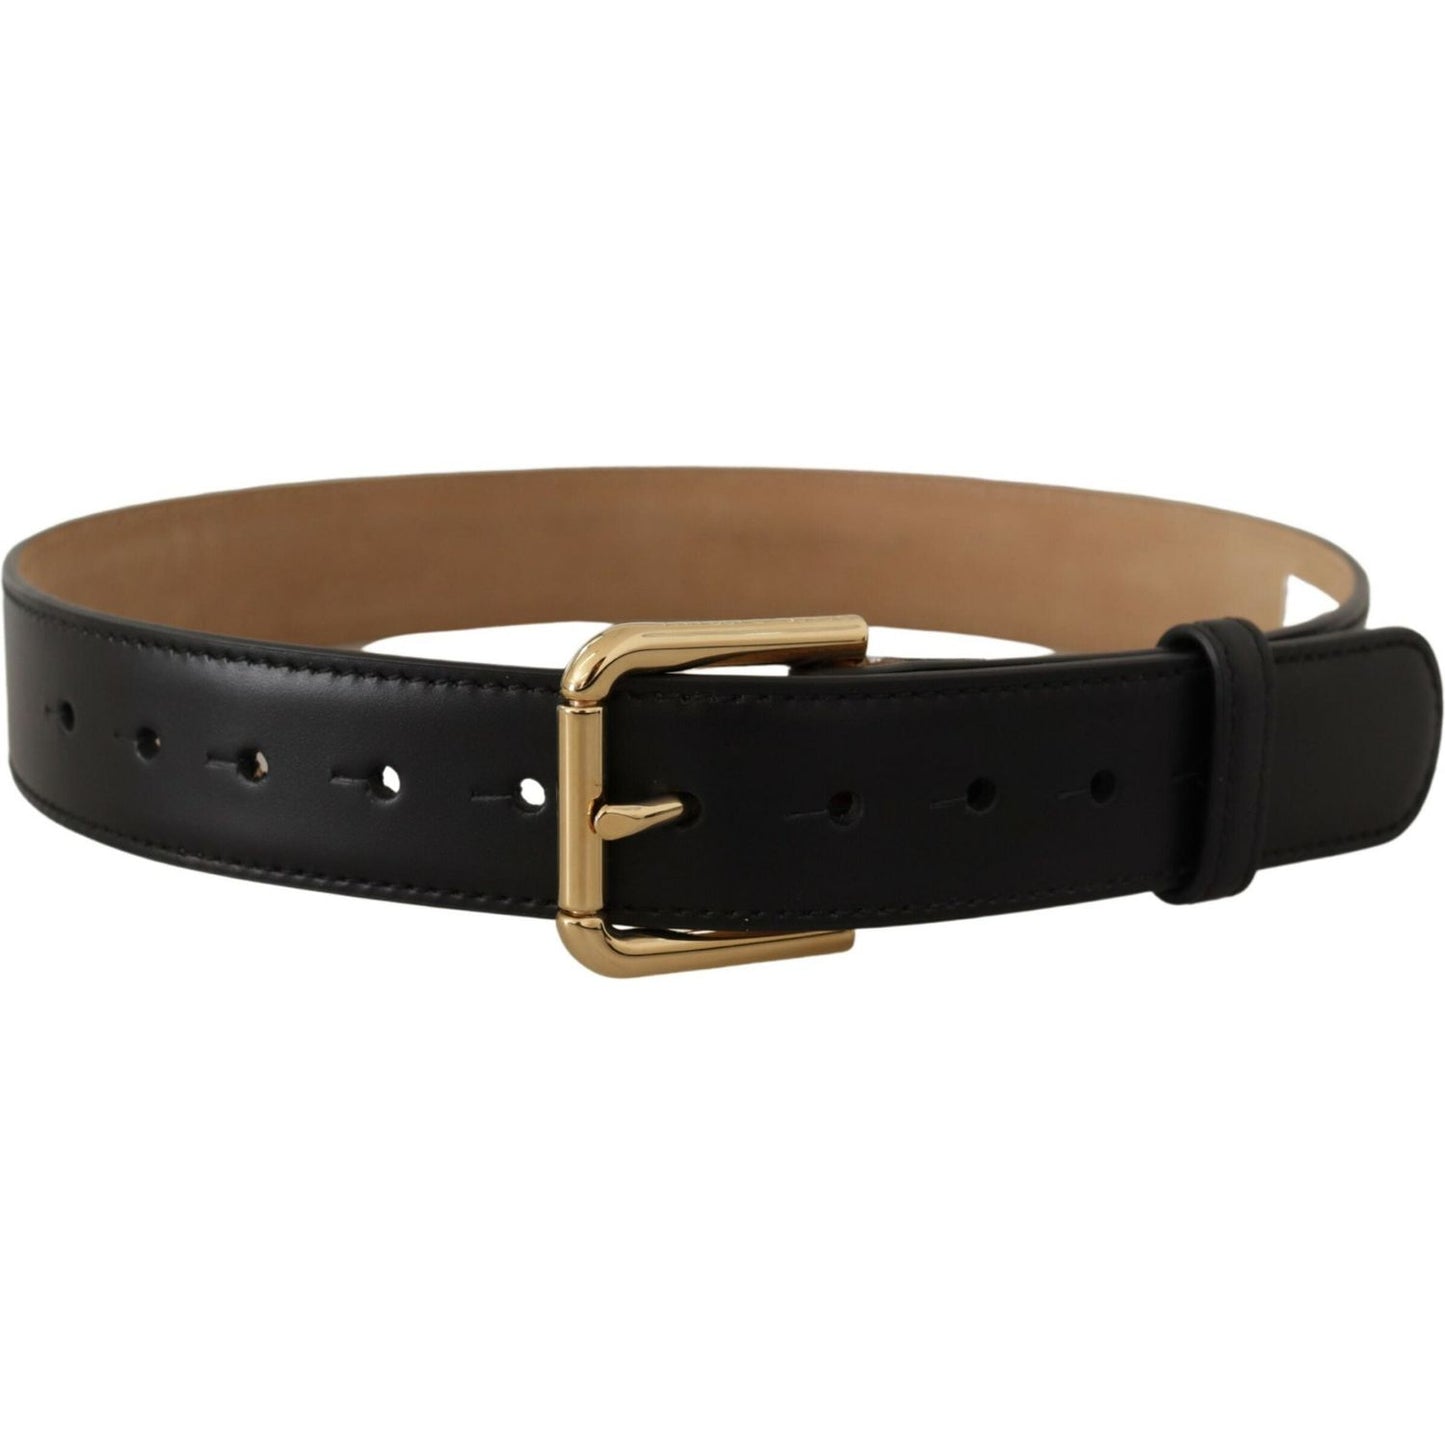 Dolce & Gabbana Elegant Leather Belt with Logo Buckle black-solid-leather-classic-gold-waist-buckle-belt IMG_8917-scaled-d08f52e6-0ac.jpg